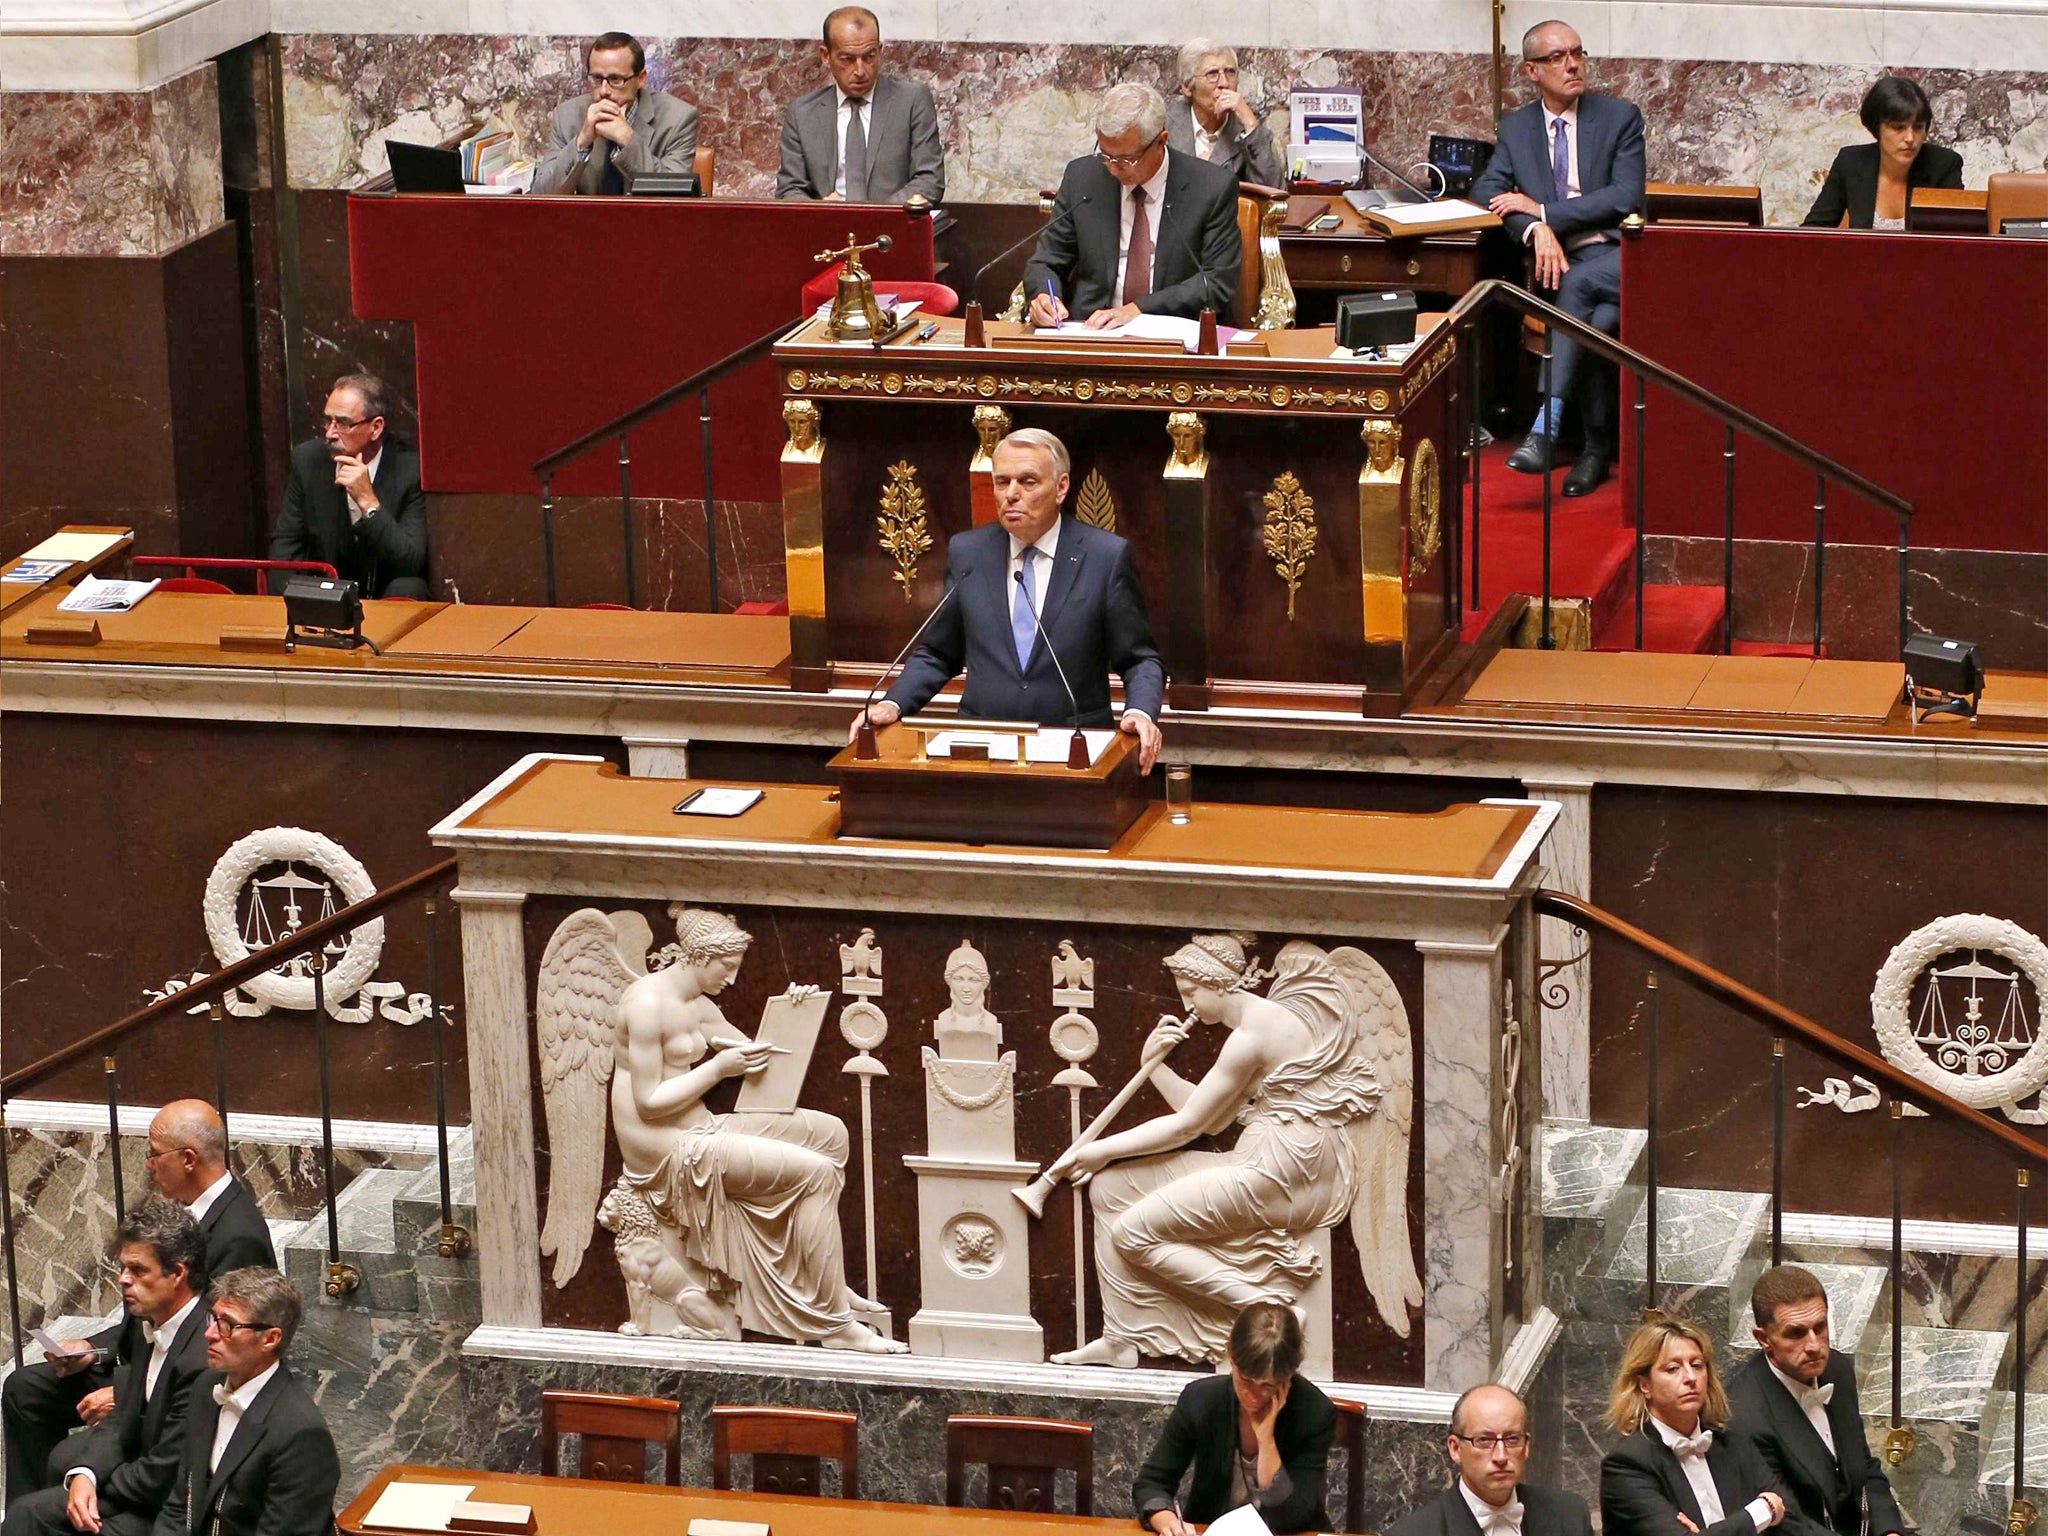 Prime Minister Jean-Marc Ayrault addresses the French National Assembly on Syria